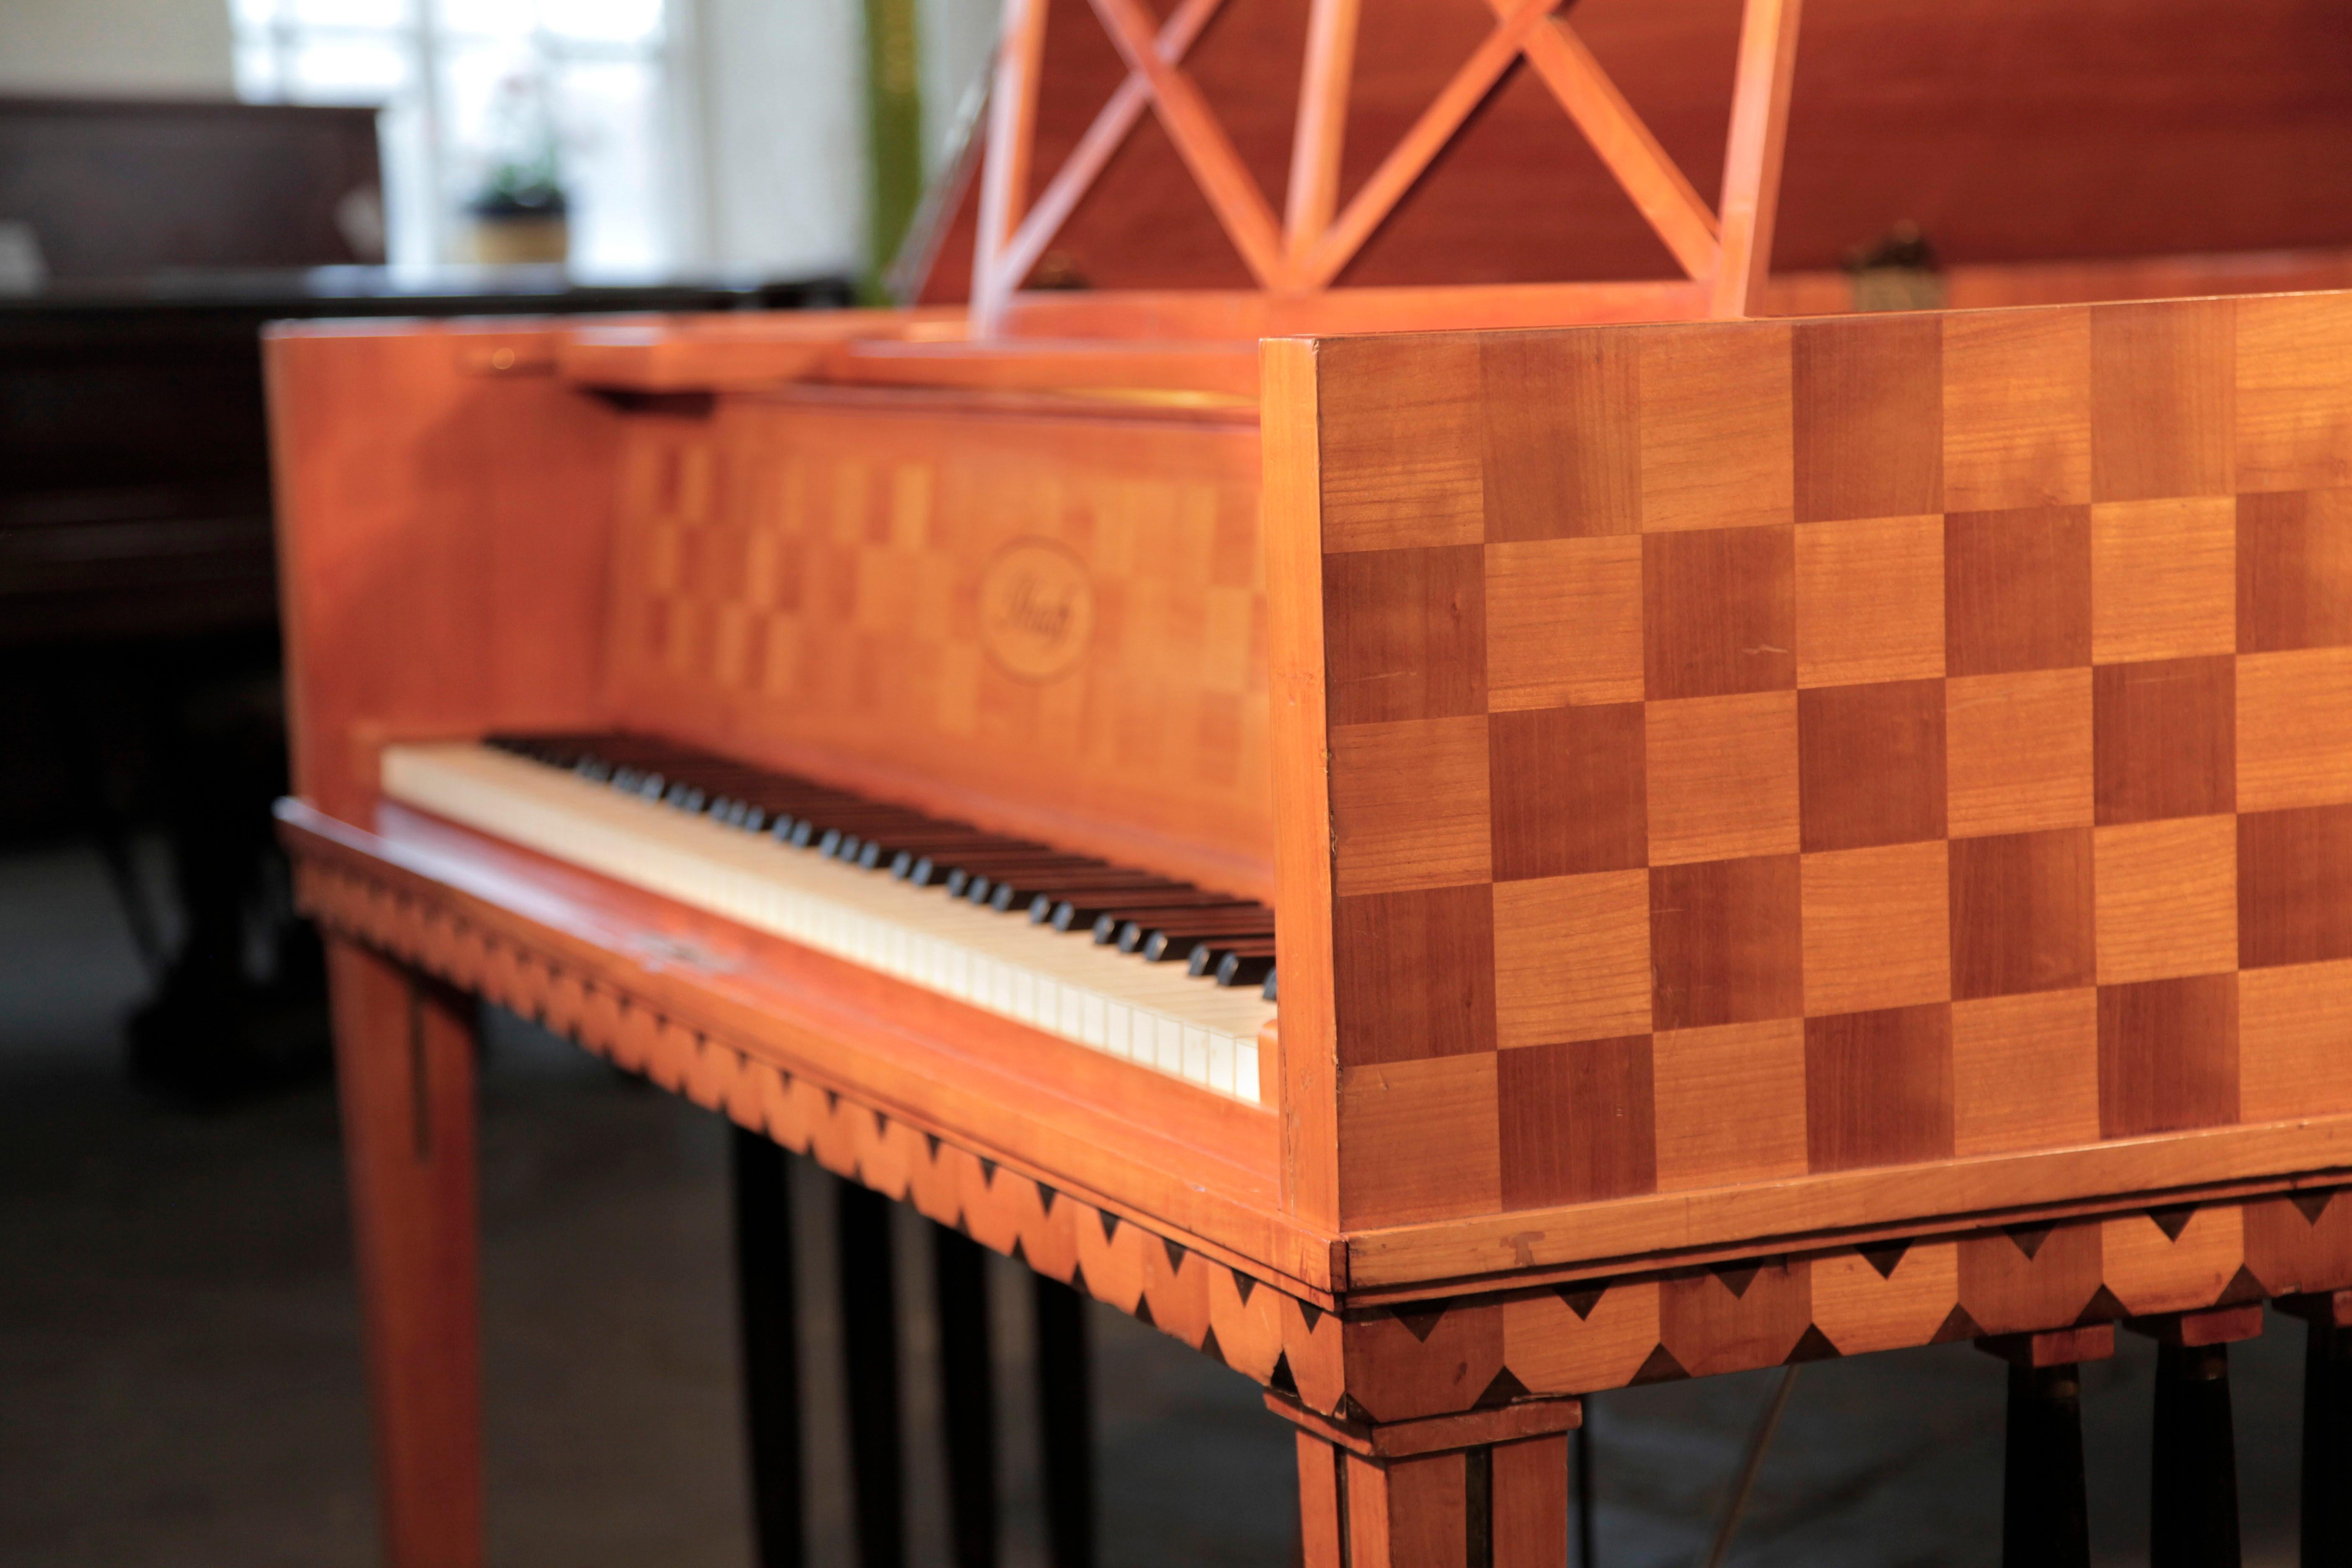 Restored, 1907 Ibach Model 2 grand piano with a cherry case in a checkerboard design and inlaid, contrasting squares on the piano lid. Piano music desk is in an openwork dual criss-cross design. Piano has gate legs with four contrasting black